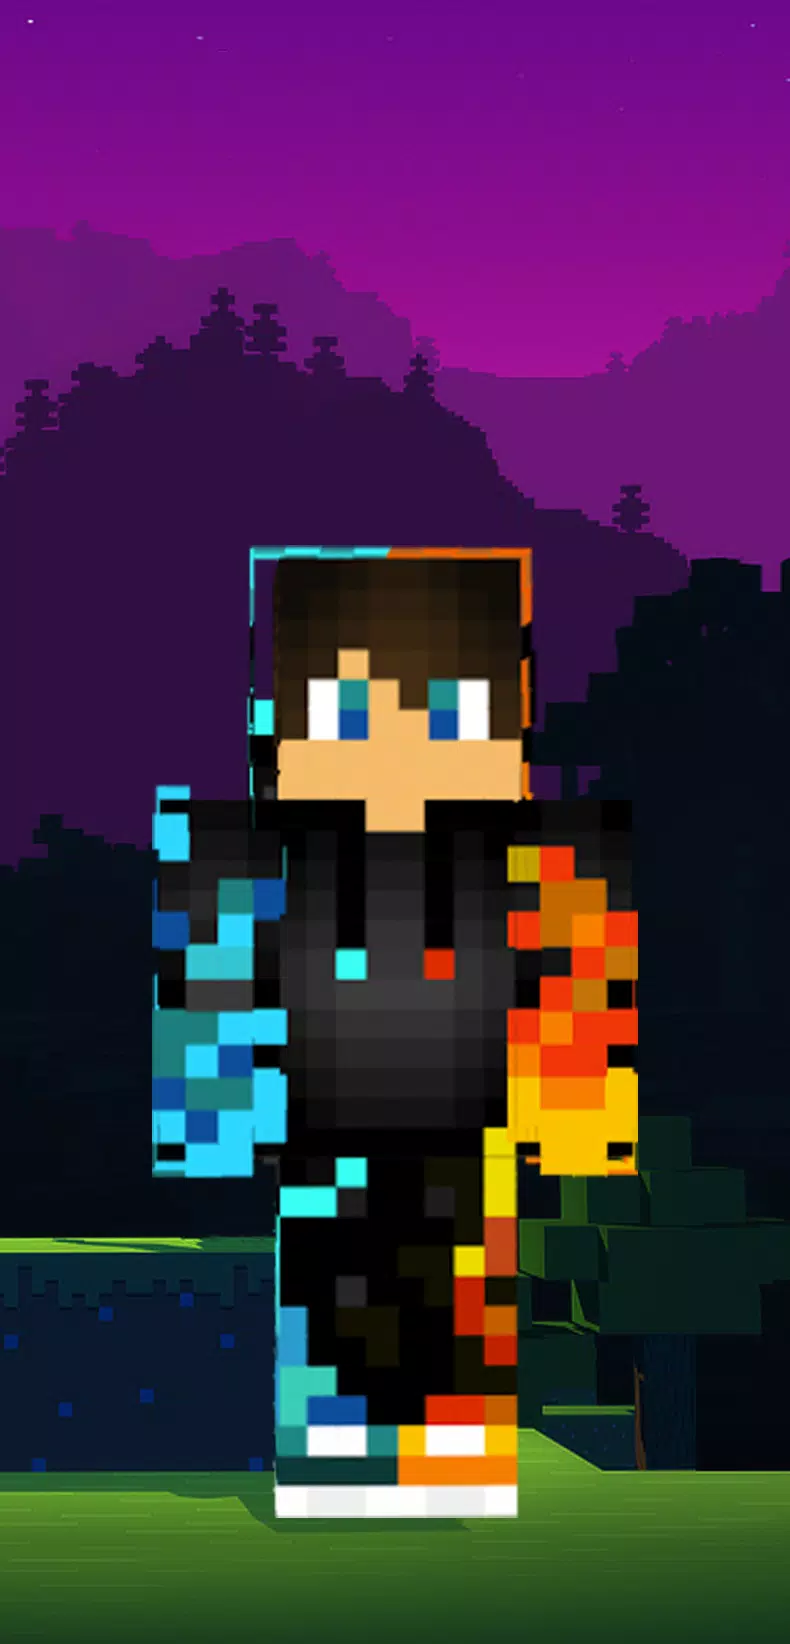 Eystreem Minecraft Skin for Android - APK Download